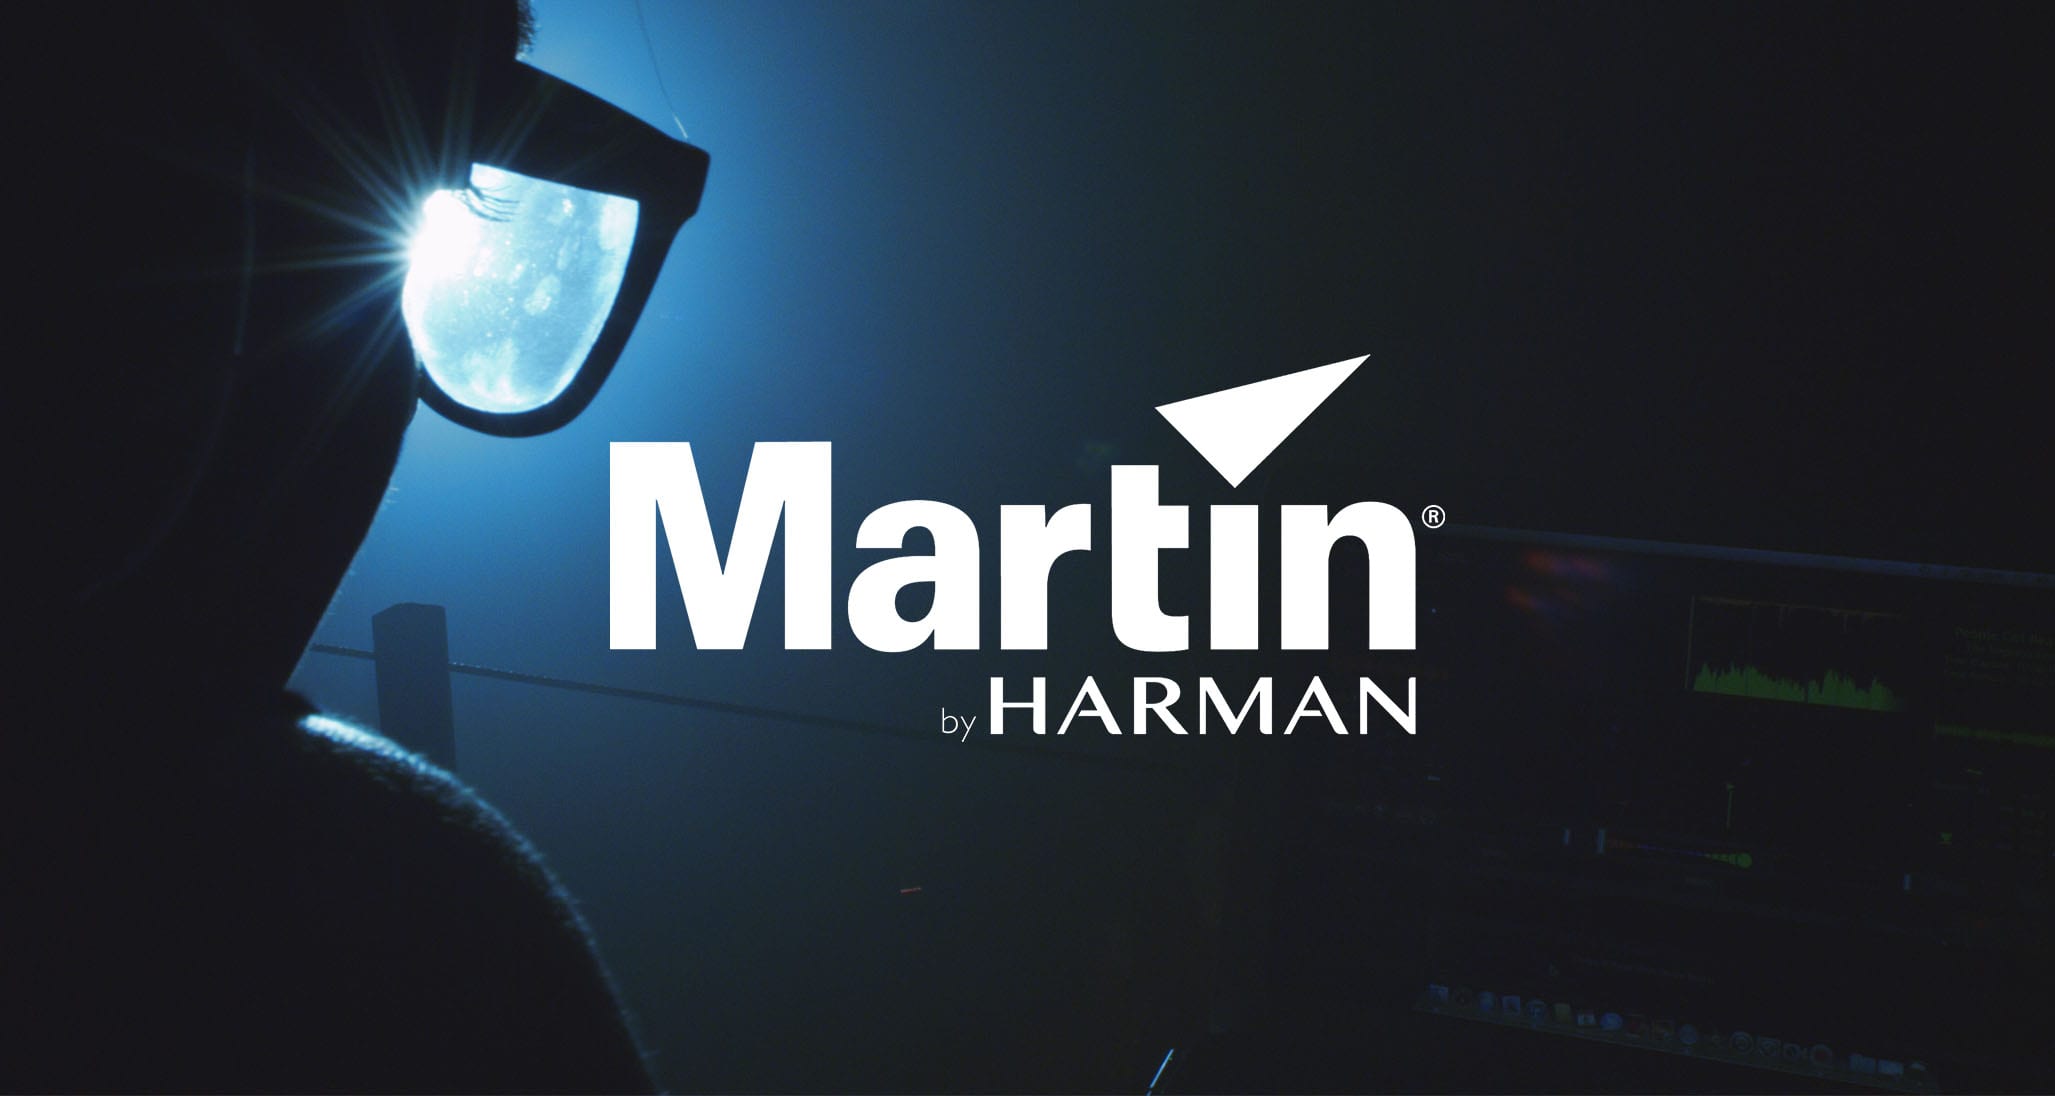 White Martin by Harman Lighting logo with background side profile looking through glasses of a person from behind